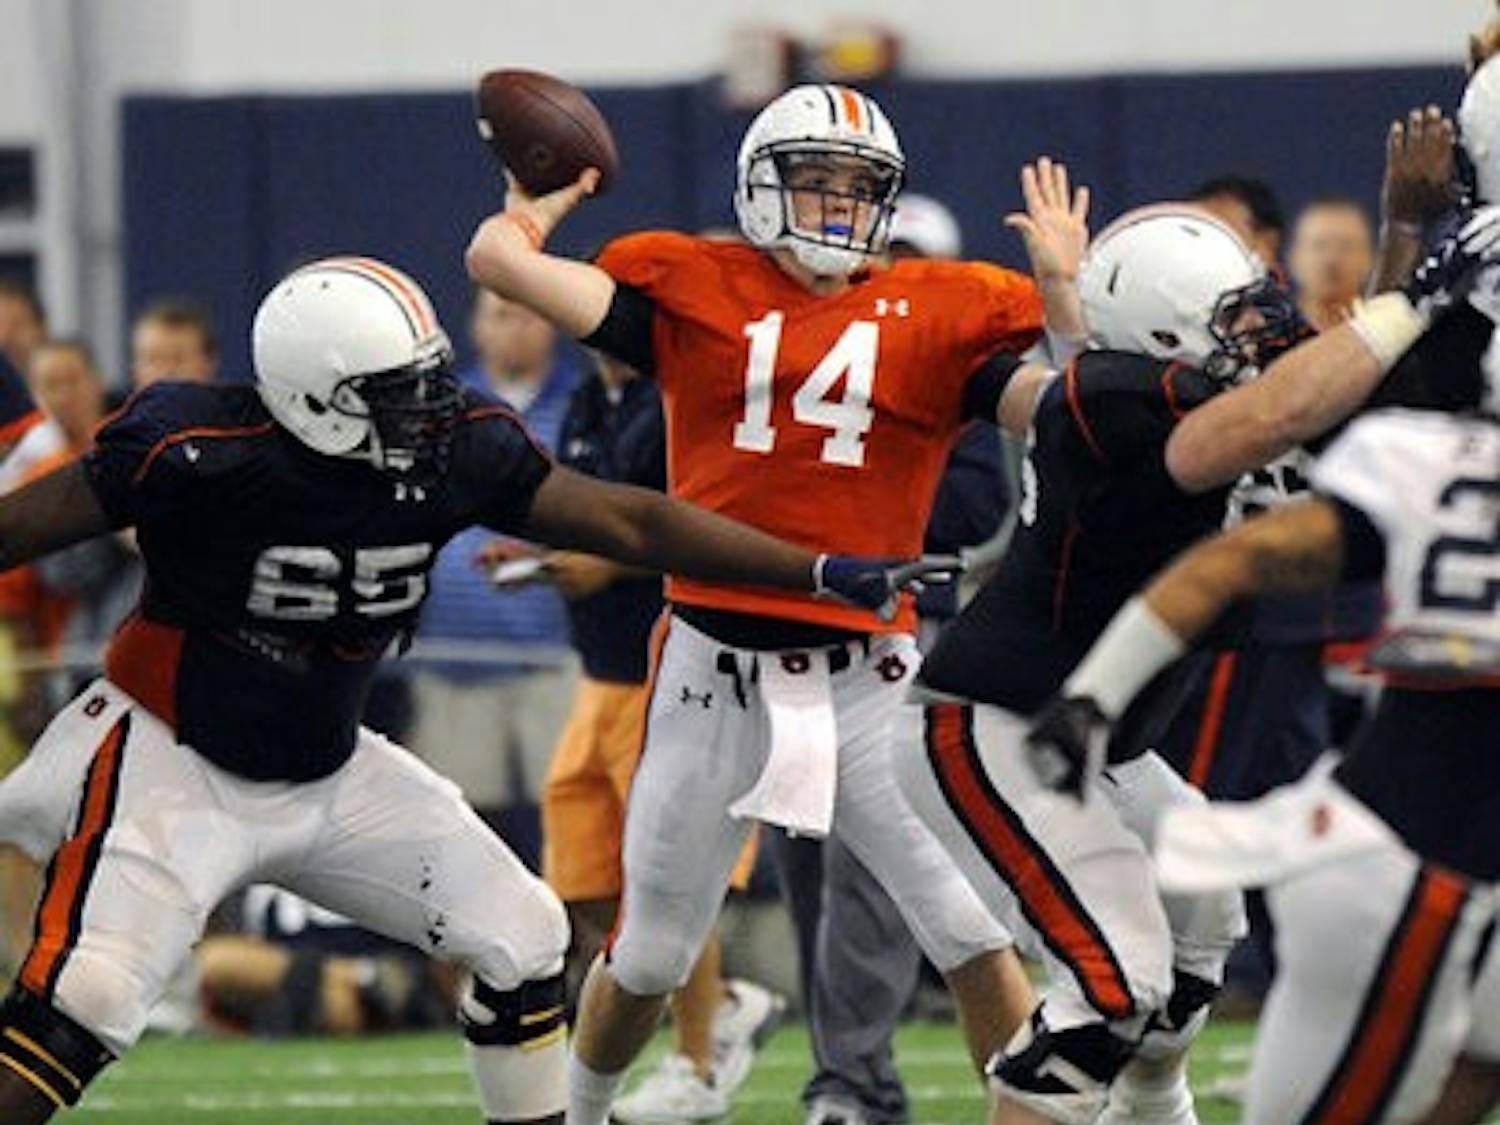 Auburn's Zeke Pike makes a throw in the team's first scrimmage Saturday. (Courtesy of Todd Van Emst)